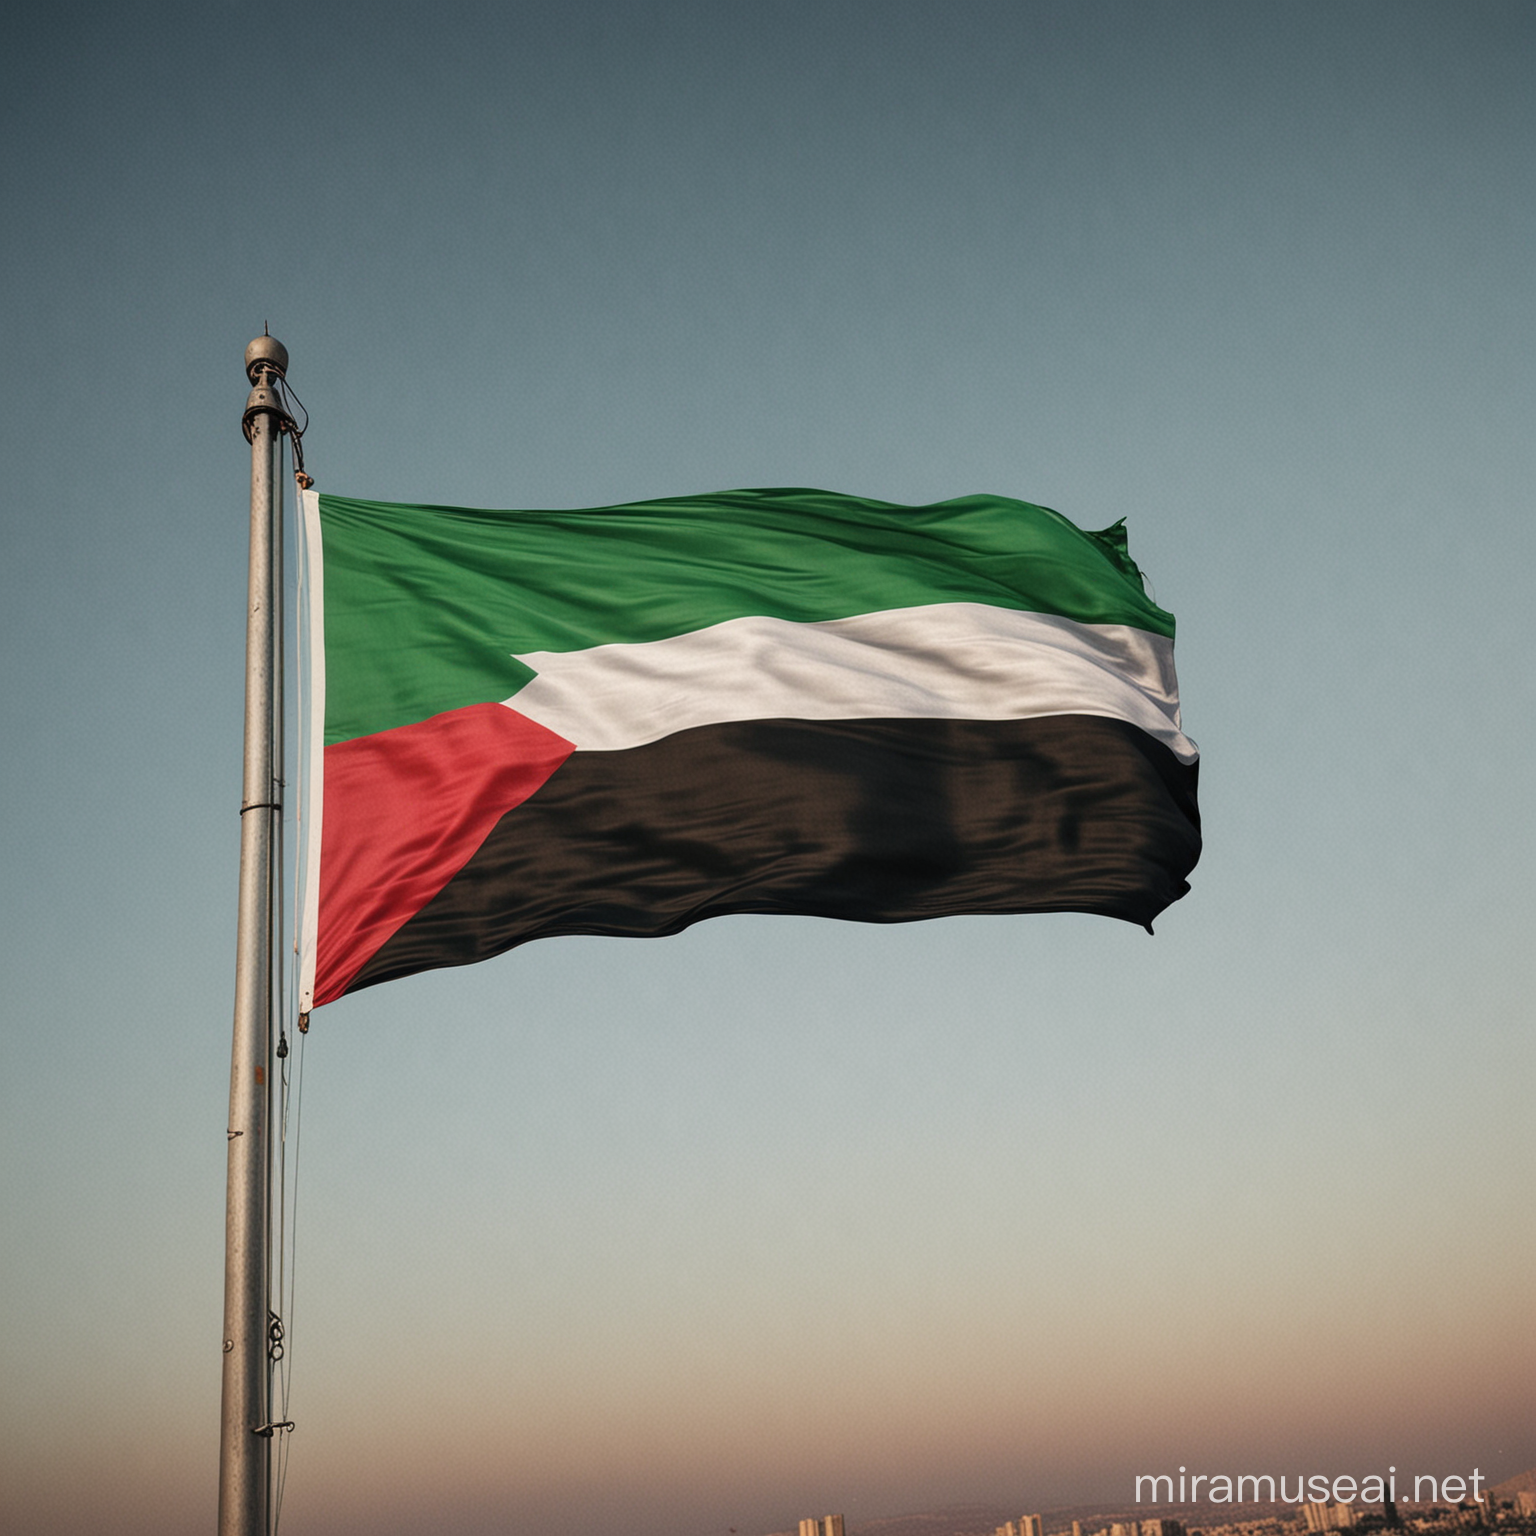 generate an image of palestine showing their flag